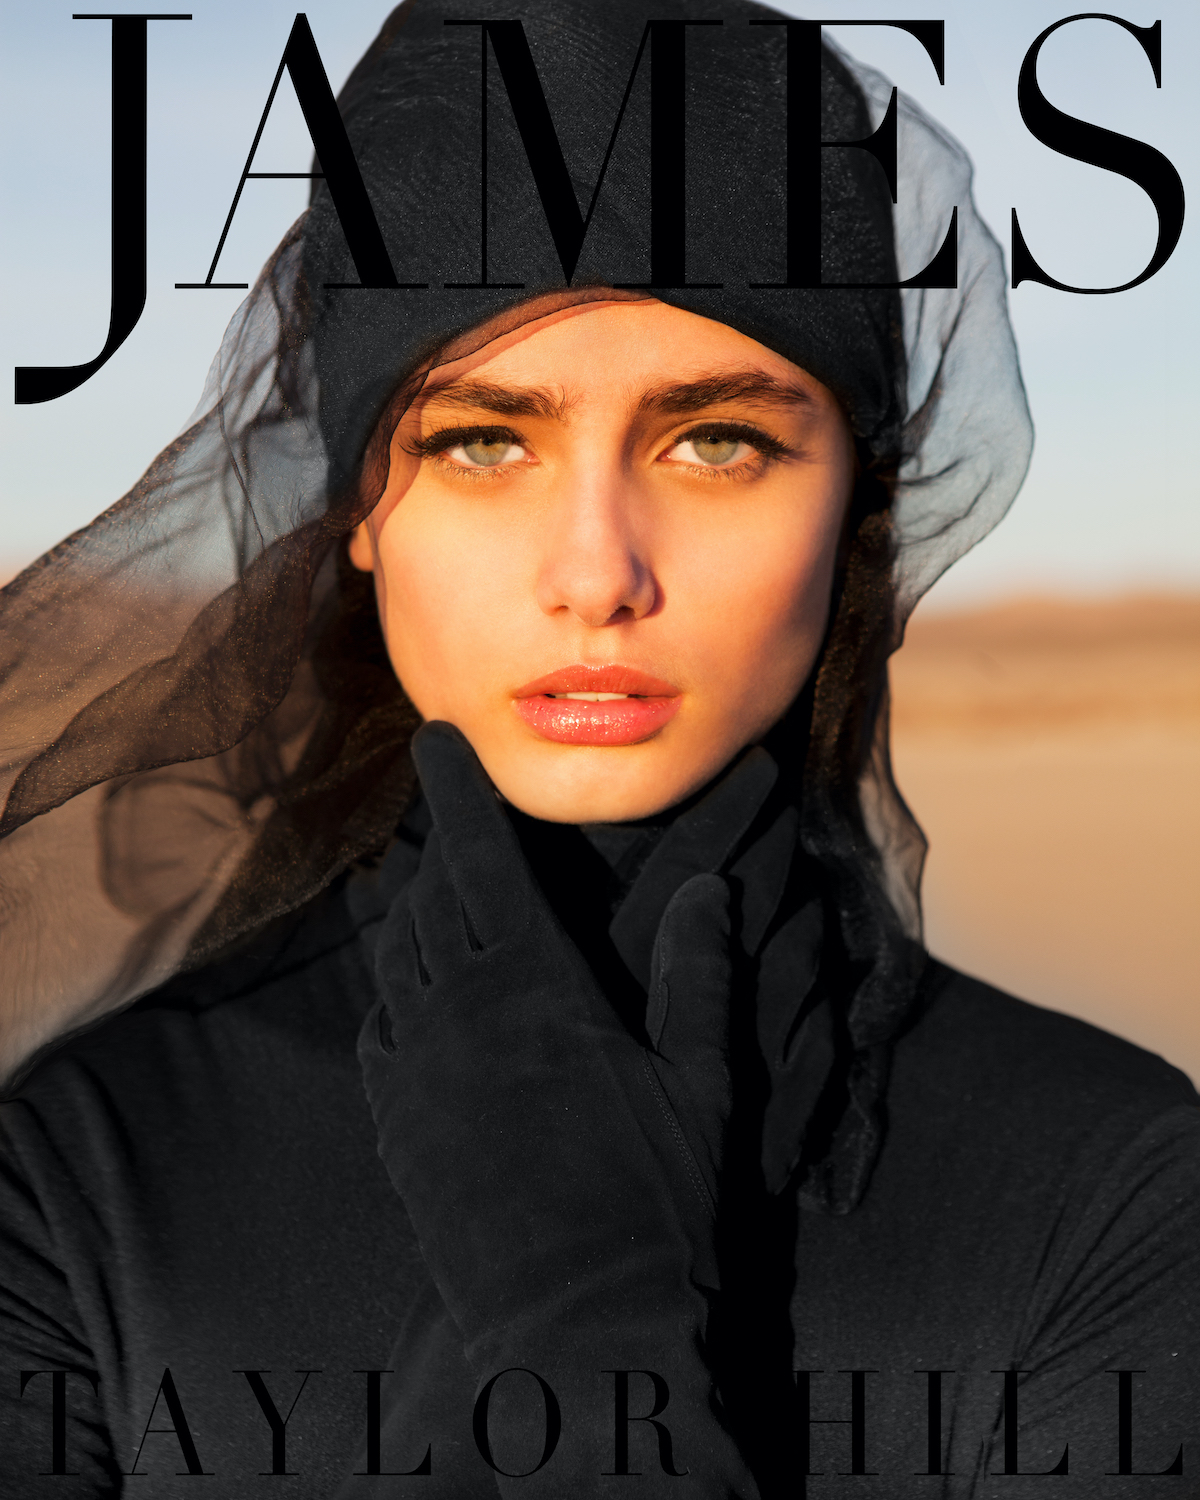 Taylor Hill photographed by Jim Jordan for James magazine